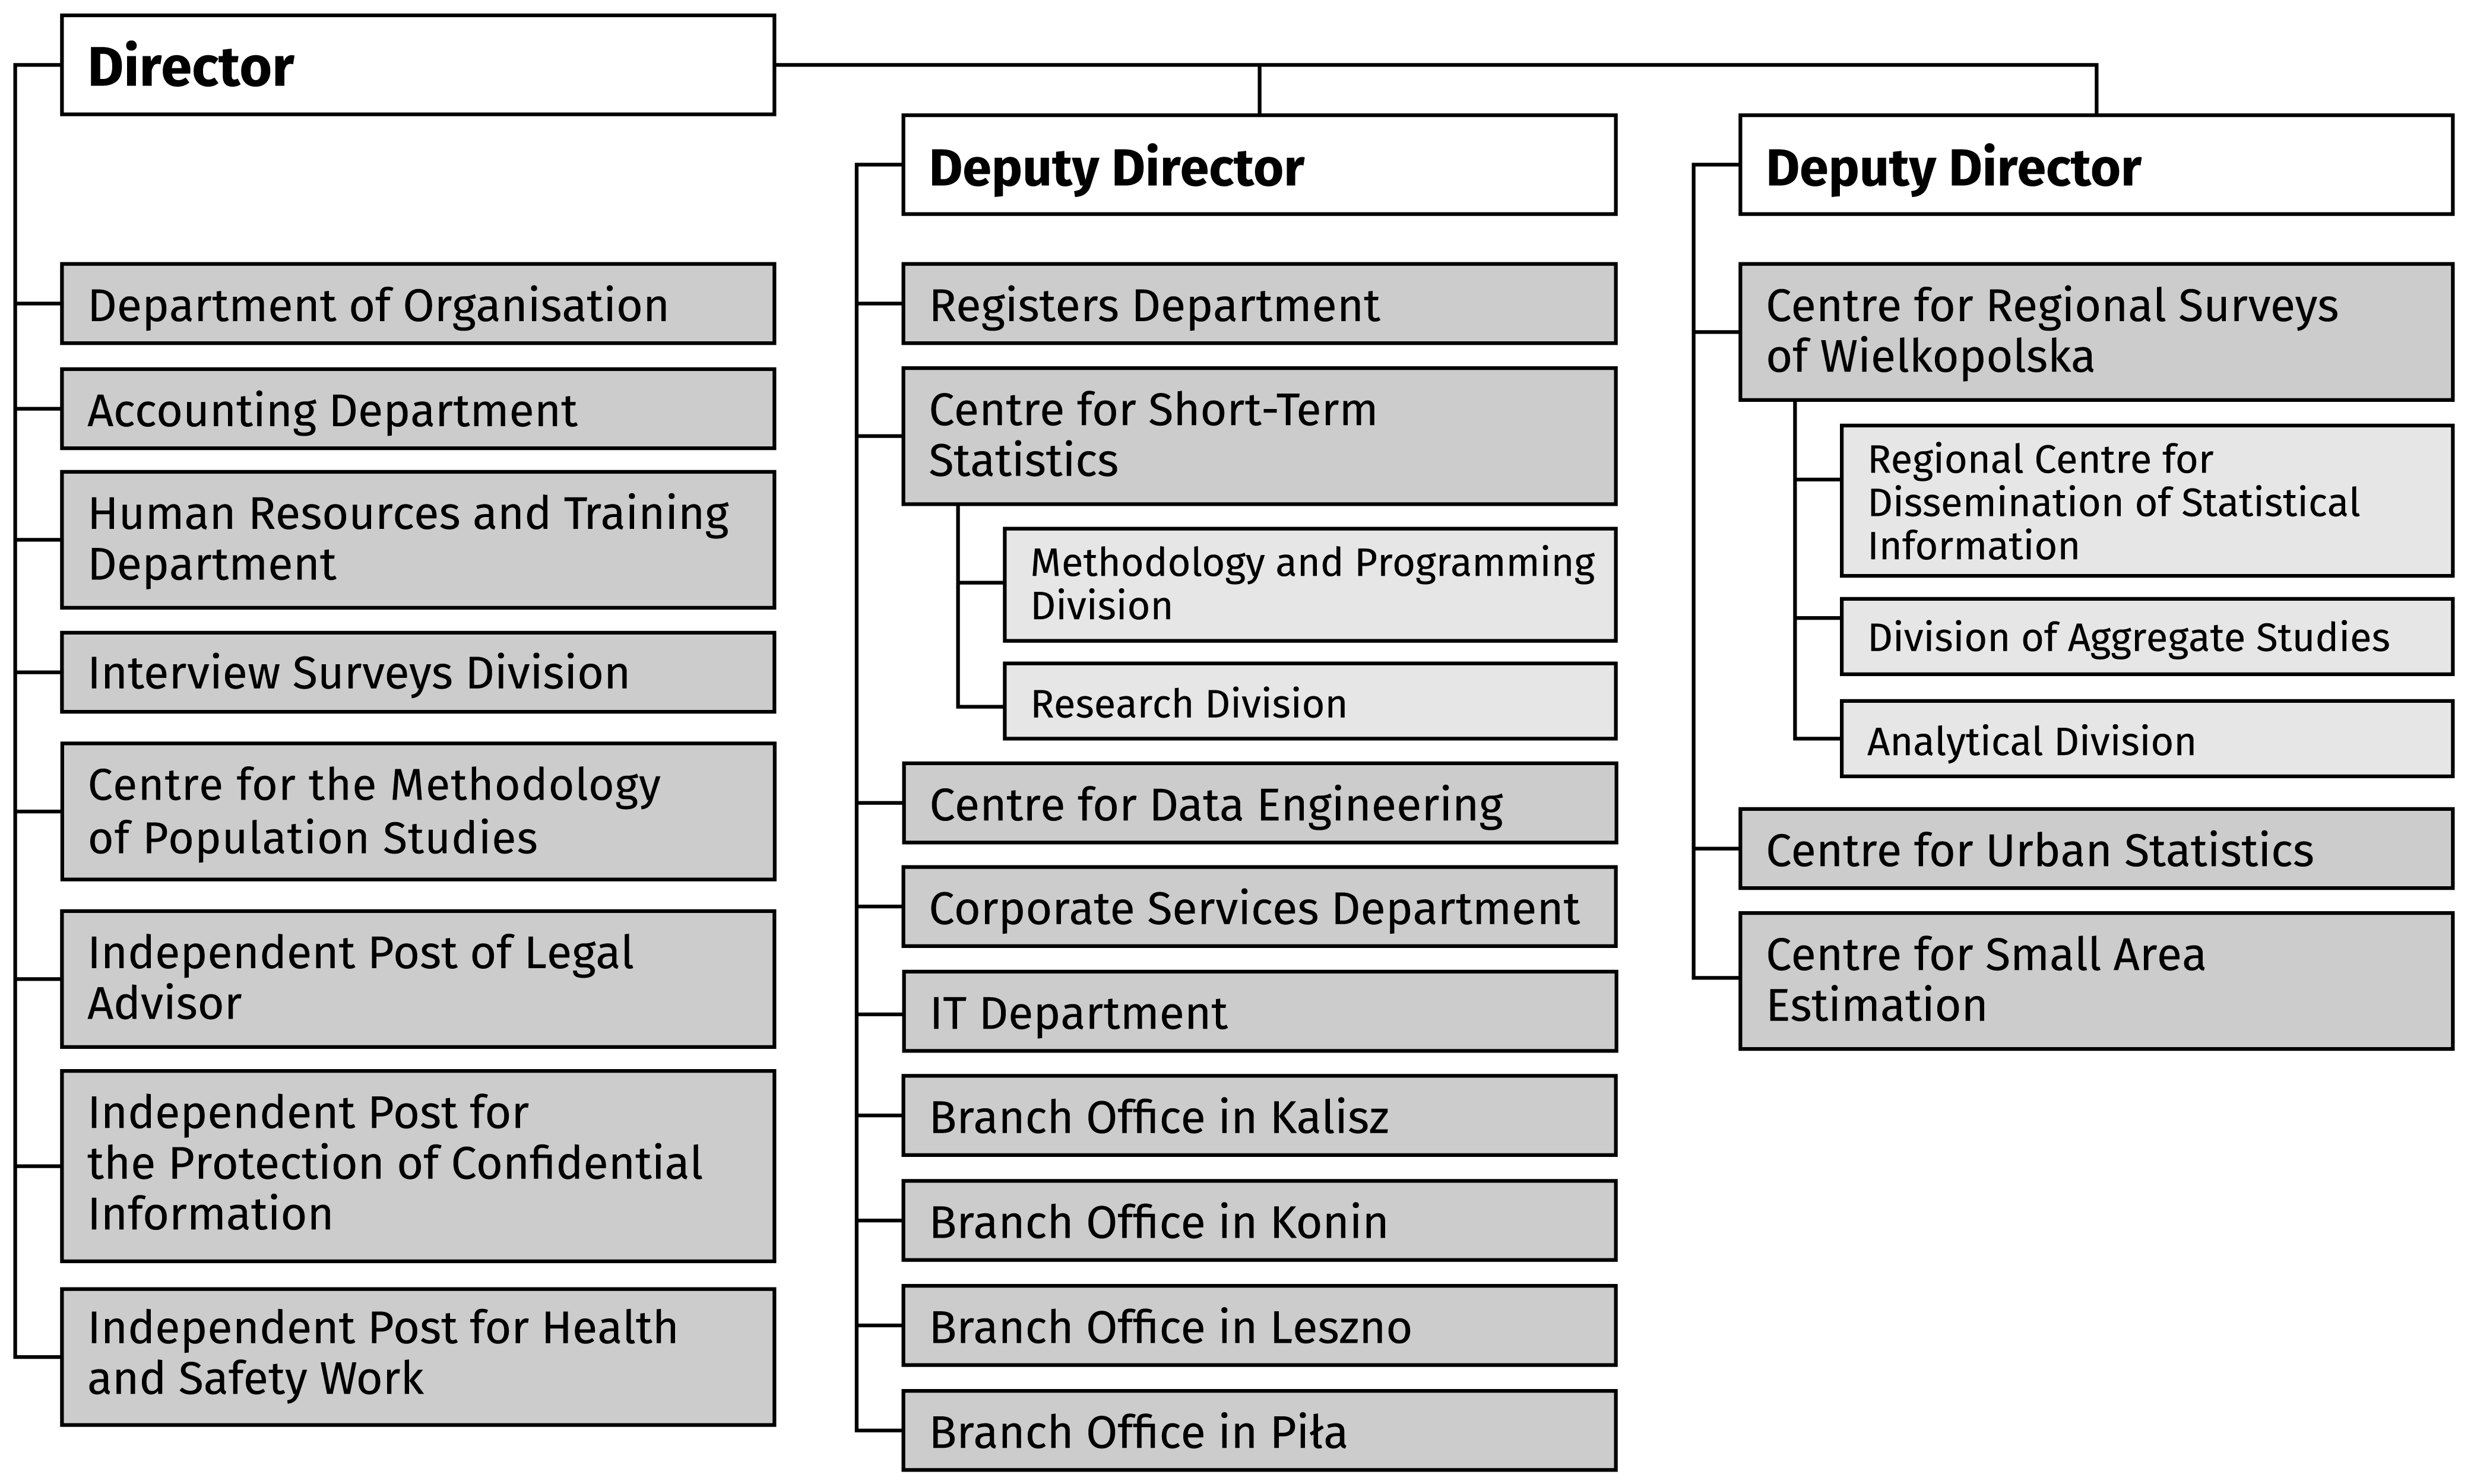 Organizational structure of the Statistical Office in Poznan